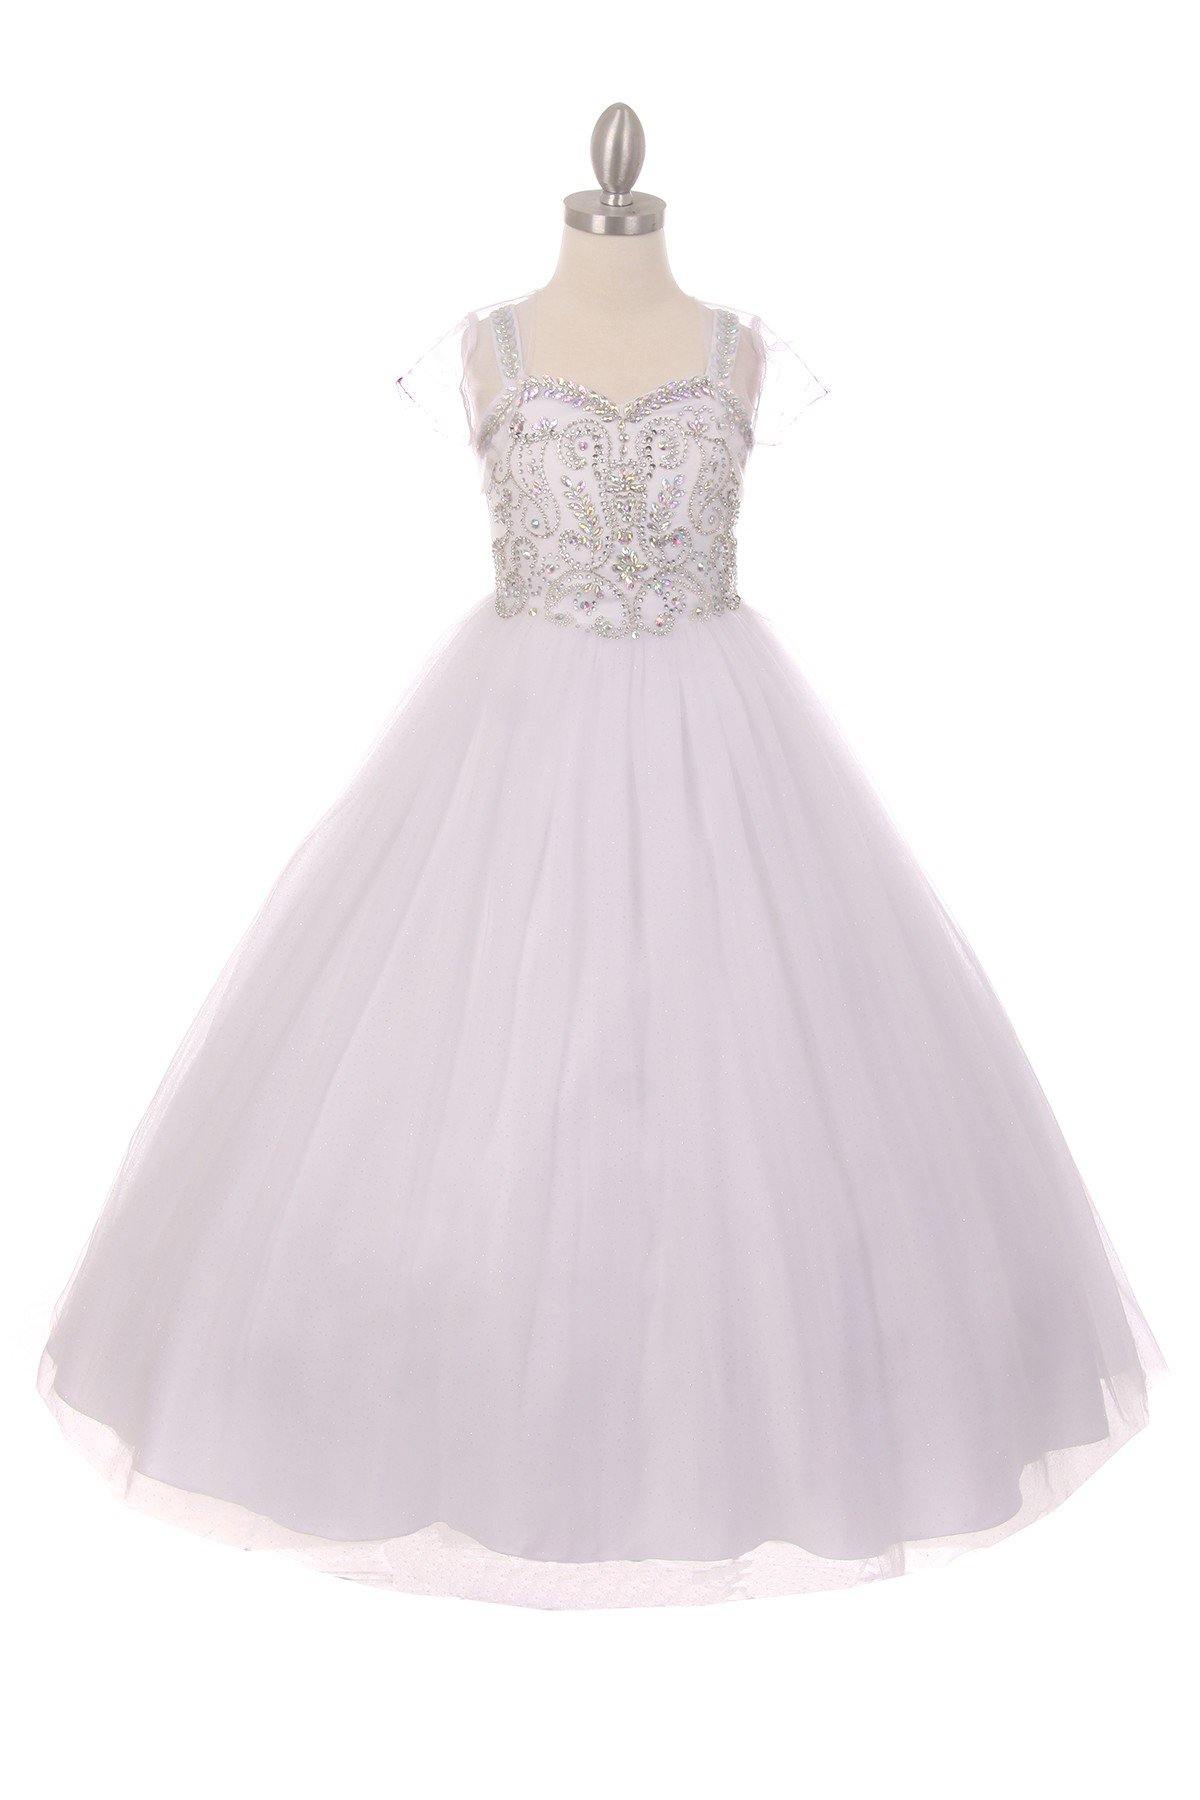 Beaded Gown with Shrug Flower Girl Dress - The Dress Outlet Cinderella Couture